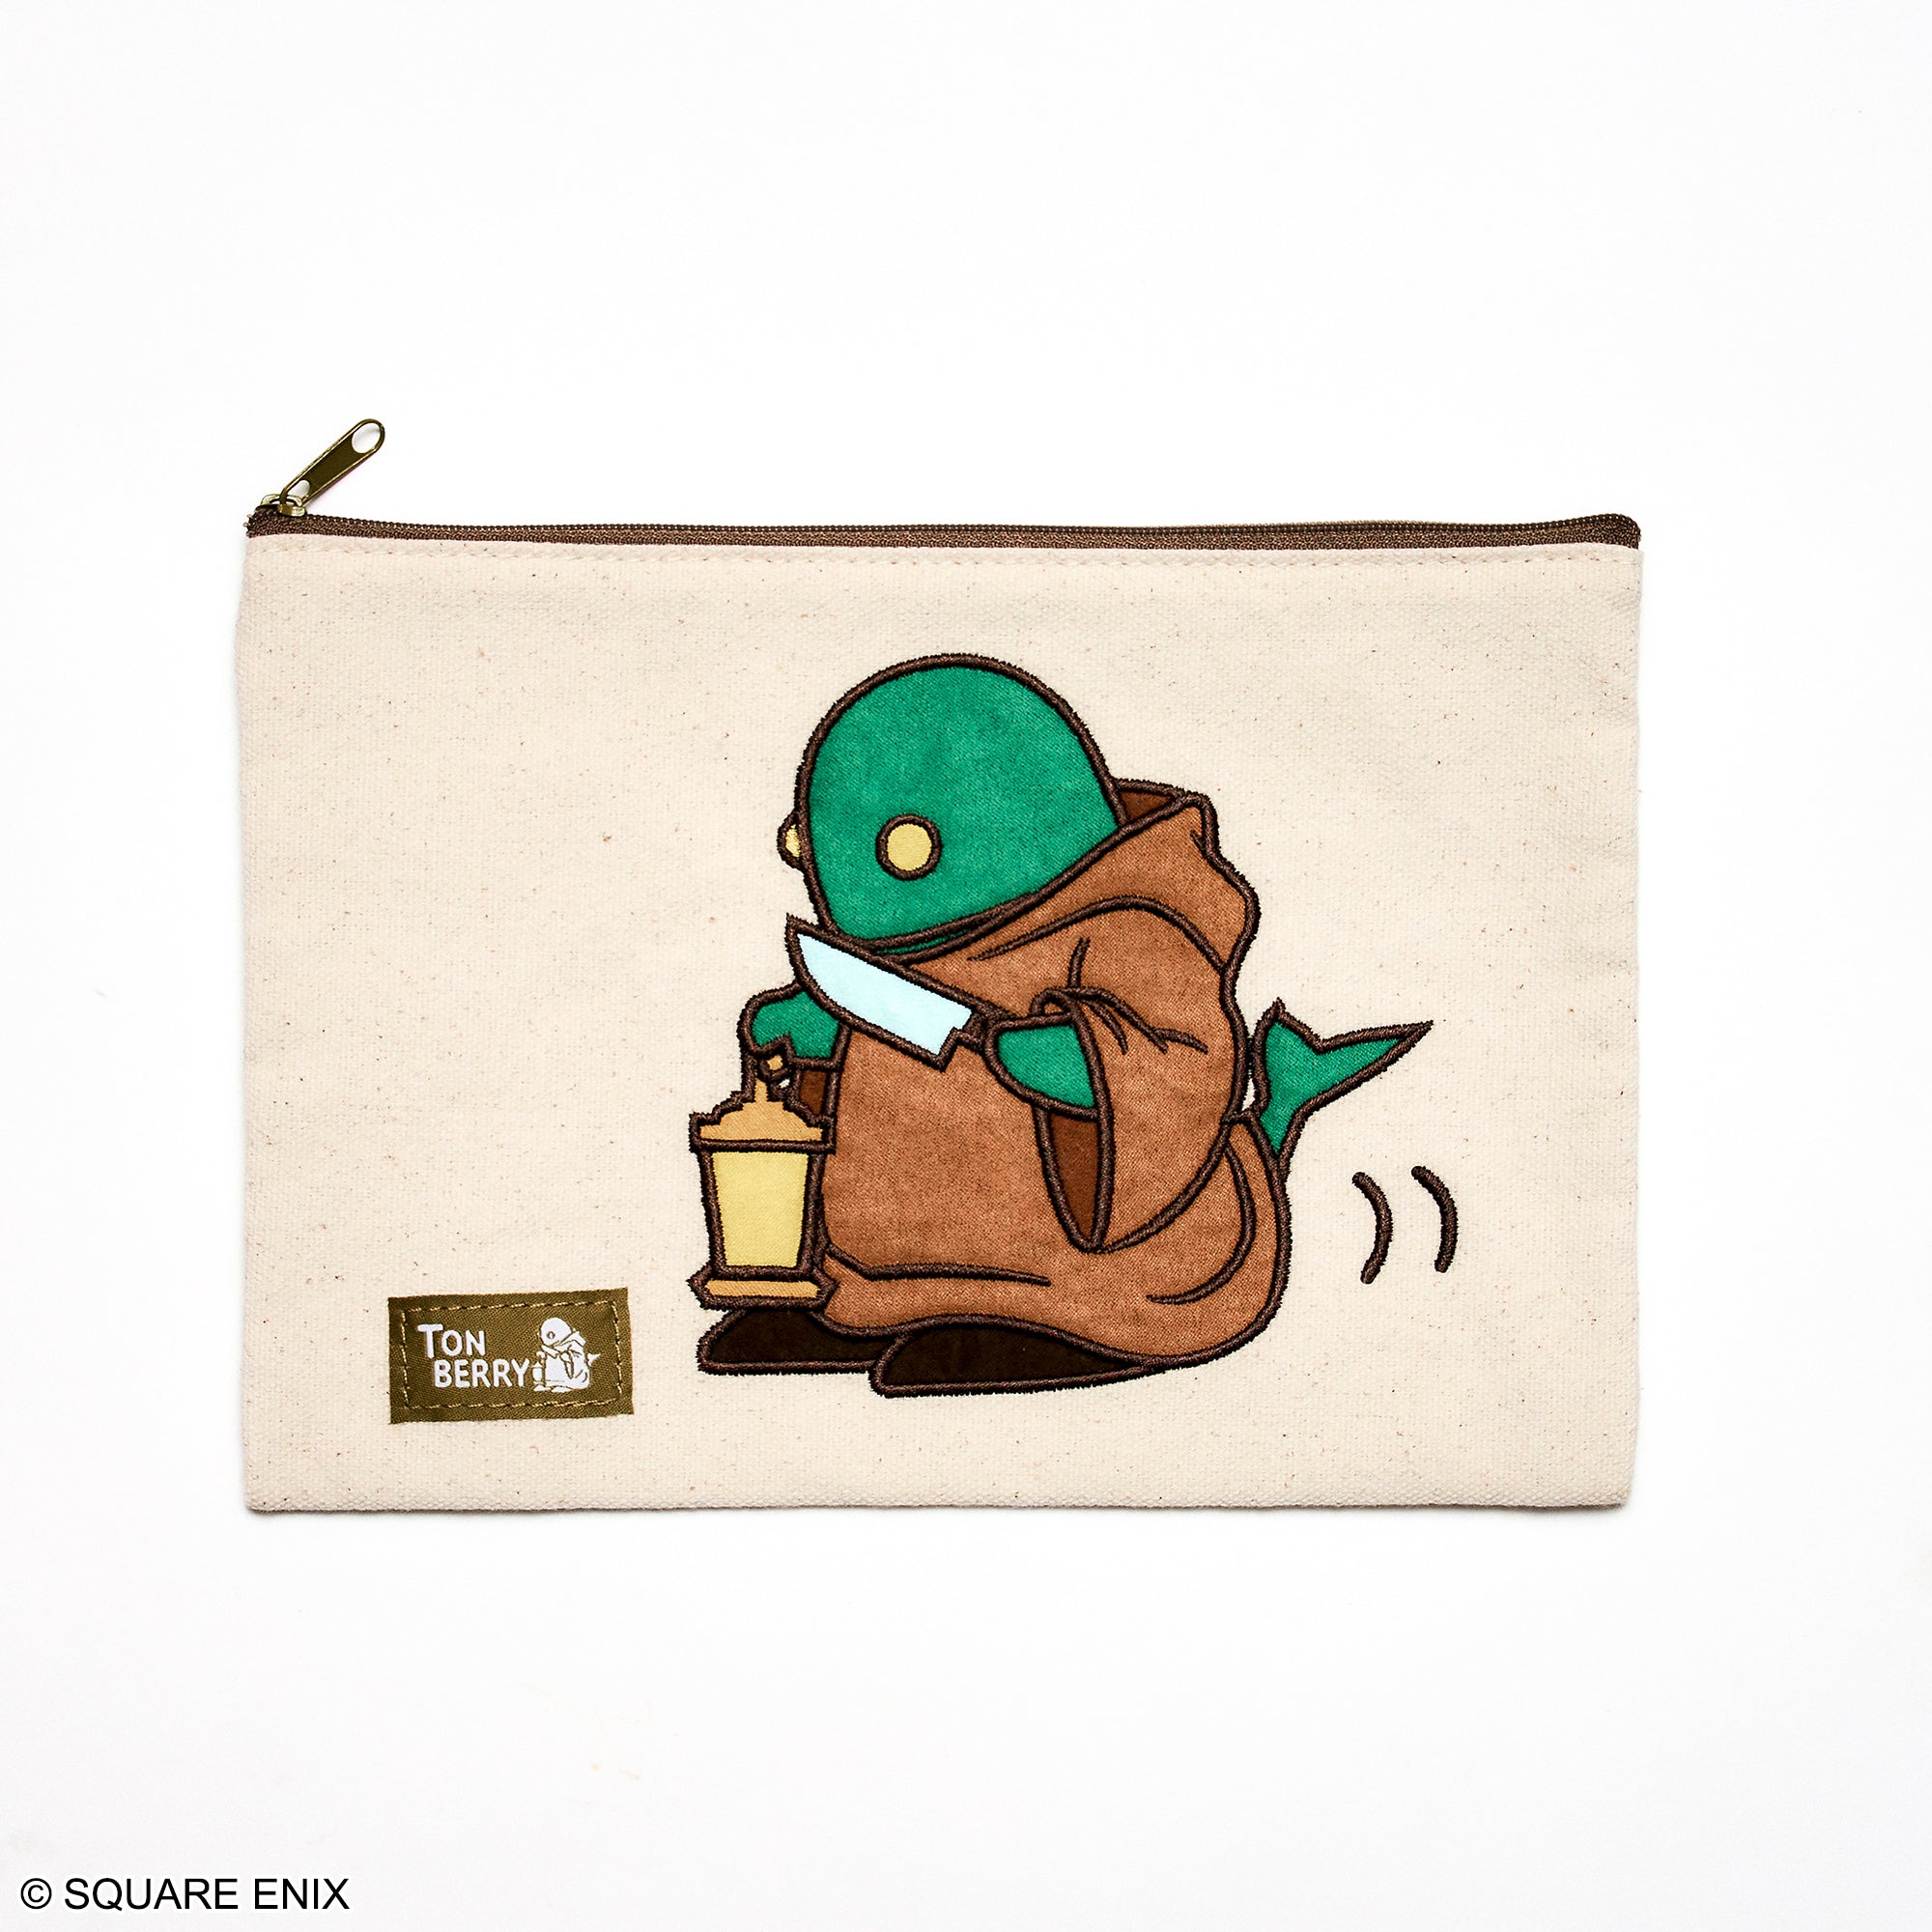 Final Fantasy Series Character Pouch - Tonberry